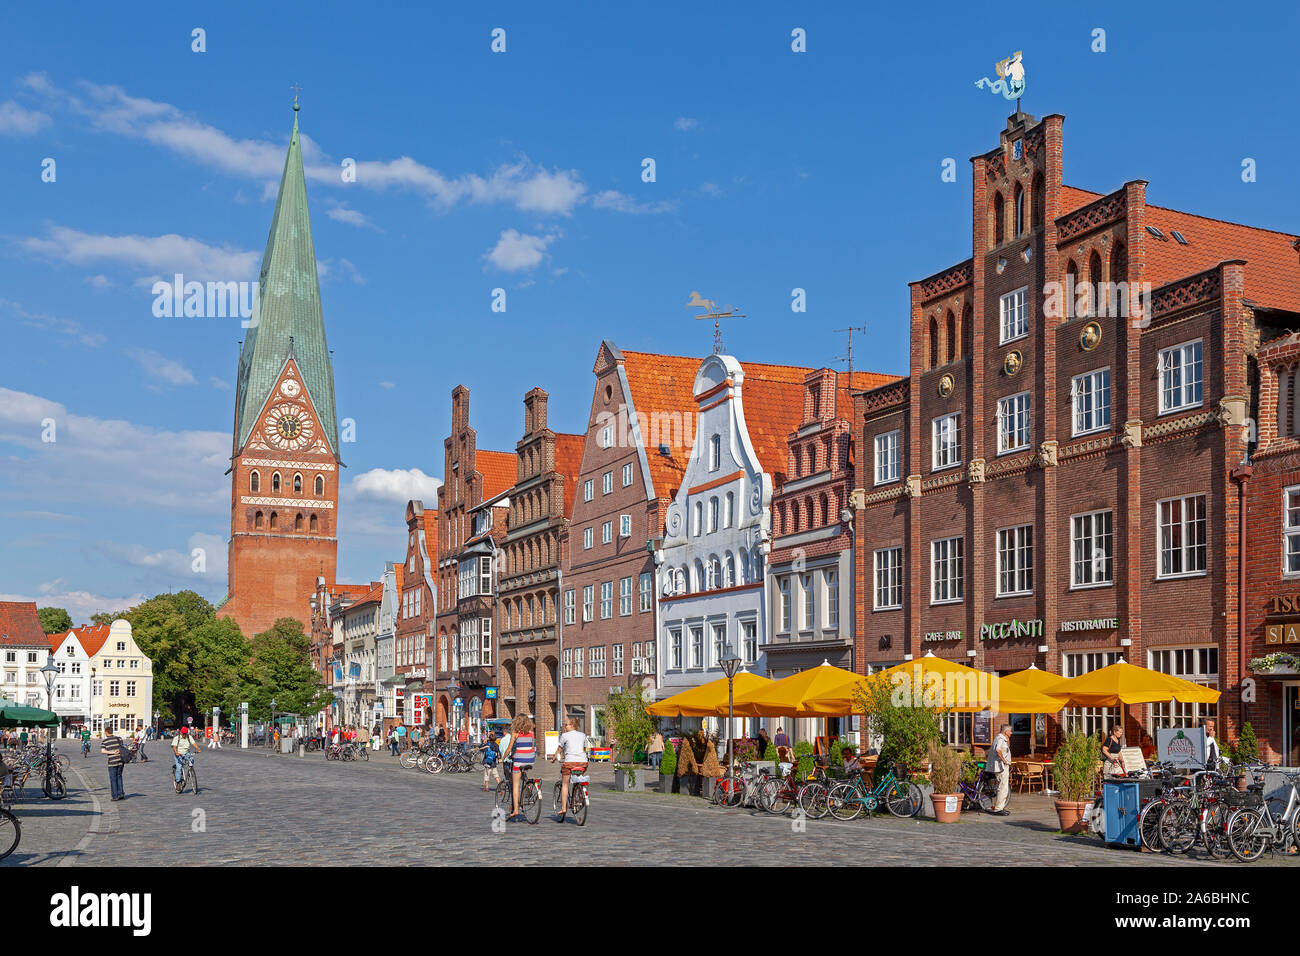 Johannis Church and the square Am Sande in Lüneburg, Lower Saxony, Germany. Stock Photo